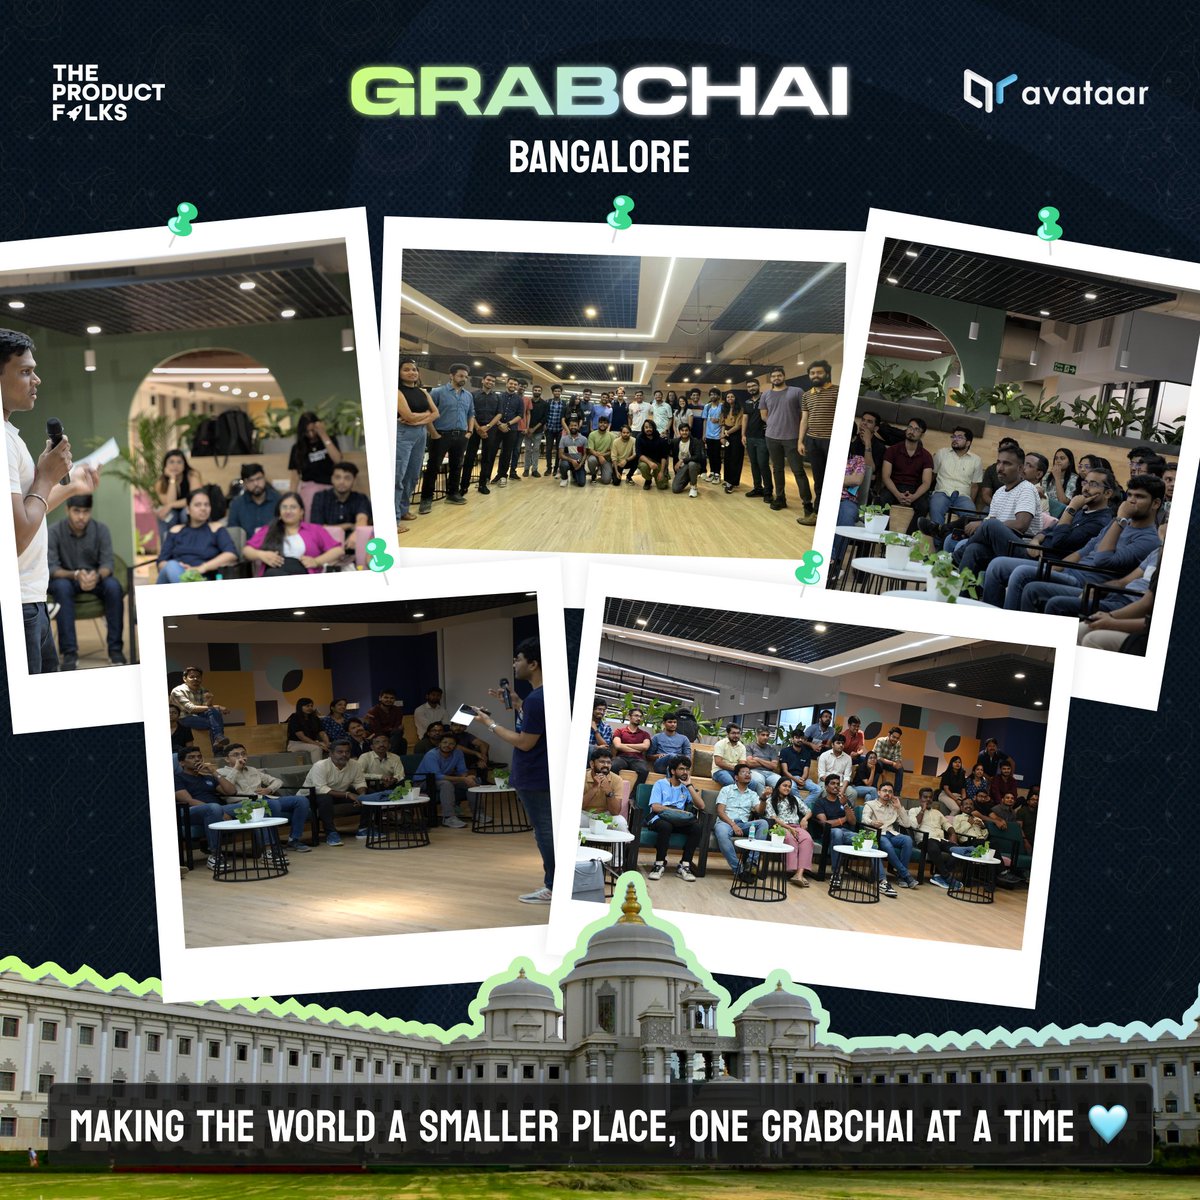 We had an absolute blast at @GrabChai in Bangalore! We had the best chats about building products, met awesome folks, and left feeling inspired! Big shout out to @Avataar for partnering up, giving the best space to hang out, and letting creative vibes flow.🎉 #Grabchai